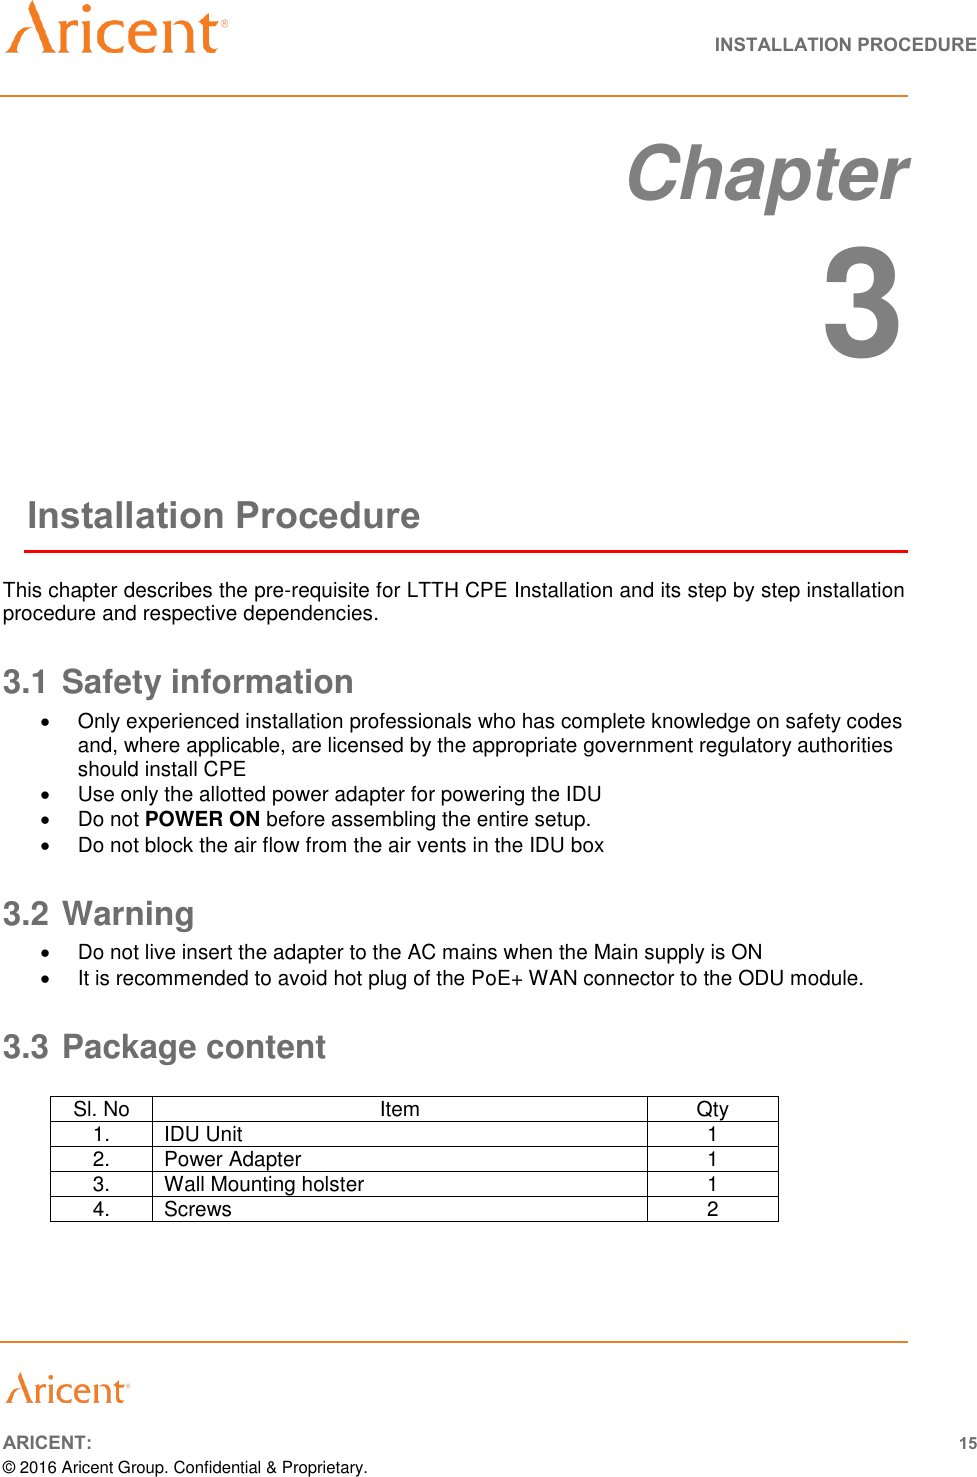   INSTALLATION PROCEDURE       ARICENT: 15 © 2016 Aricent Group. Confidential &amp; Proprietary.   Chapter  3 Installation Procedure This chapter describes the pre-requisite for LTTH CPE Installation and its step by step installation procedure and respective dependencies. 3.1 Safety information   Only experienced installation professionals who has complete knowledge on safety codes and, where applicable, are licensed by the appropriate government regulatory authorities should install CPE    Use only the allotted power adapter for powering the IDU   Do not POWER ON before assembling the entire setup.   Do not block the air flow from the air vents in the IDU box 3.2 Warning   Do not live insert the adapter to the AC mains when the Main supply is ON   It is recommended to avoid hot plug of the PoE+ WAN connector to the ODU module. 3.3 Package content  Sl. No Item Qty 1. IDU Unit 1 2. Power Adapter 1 3. Wall Mounting holster 1 4. Screws  2  